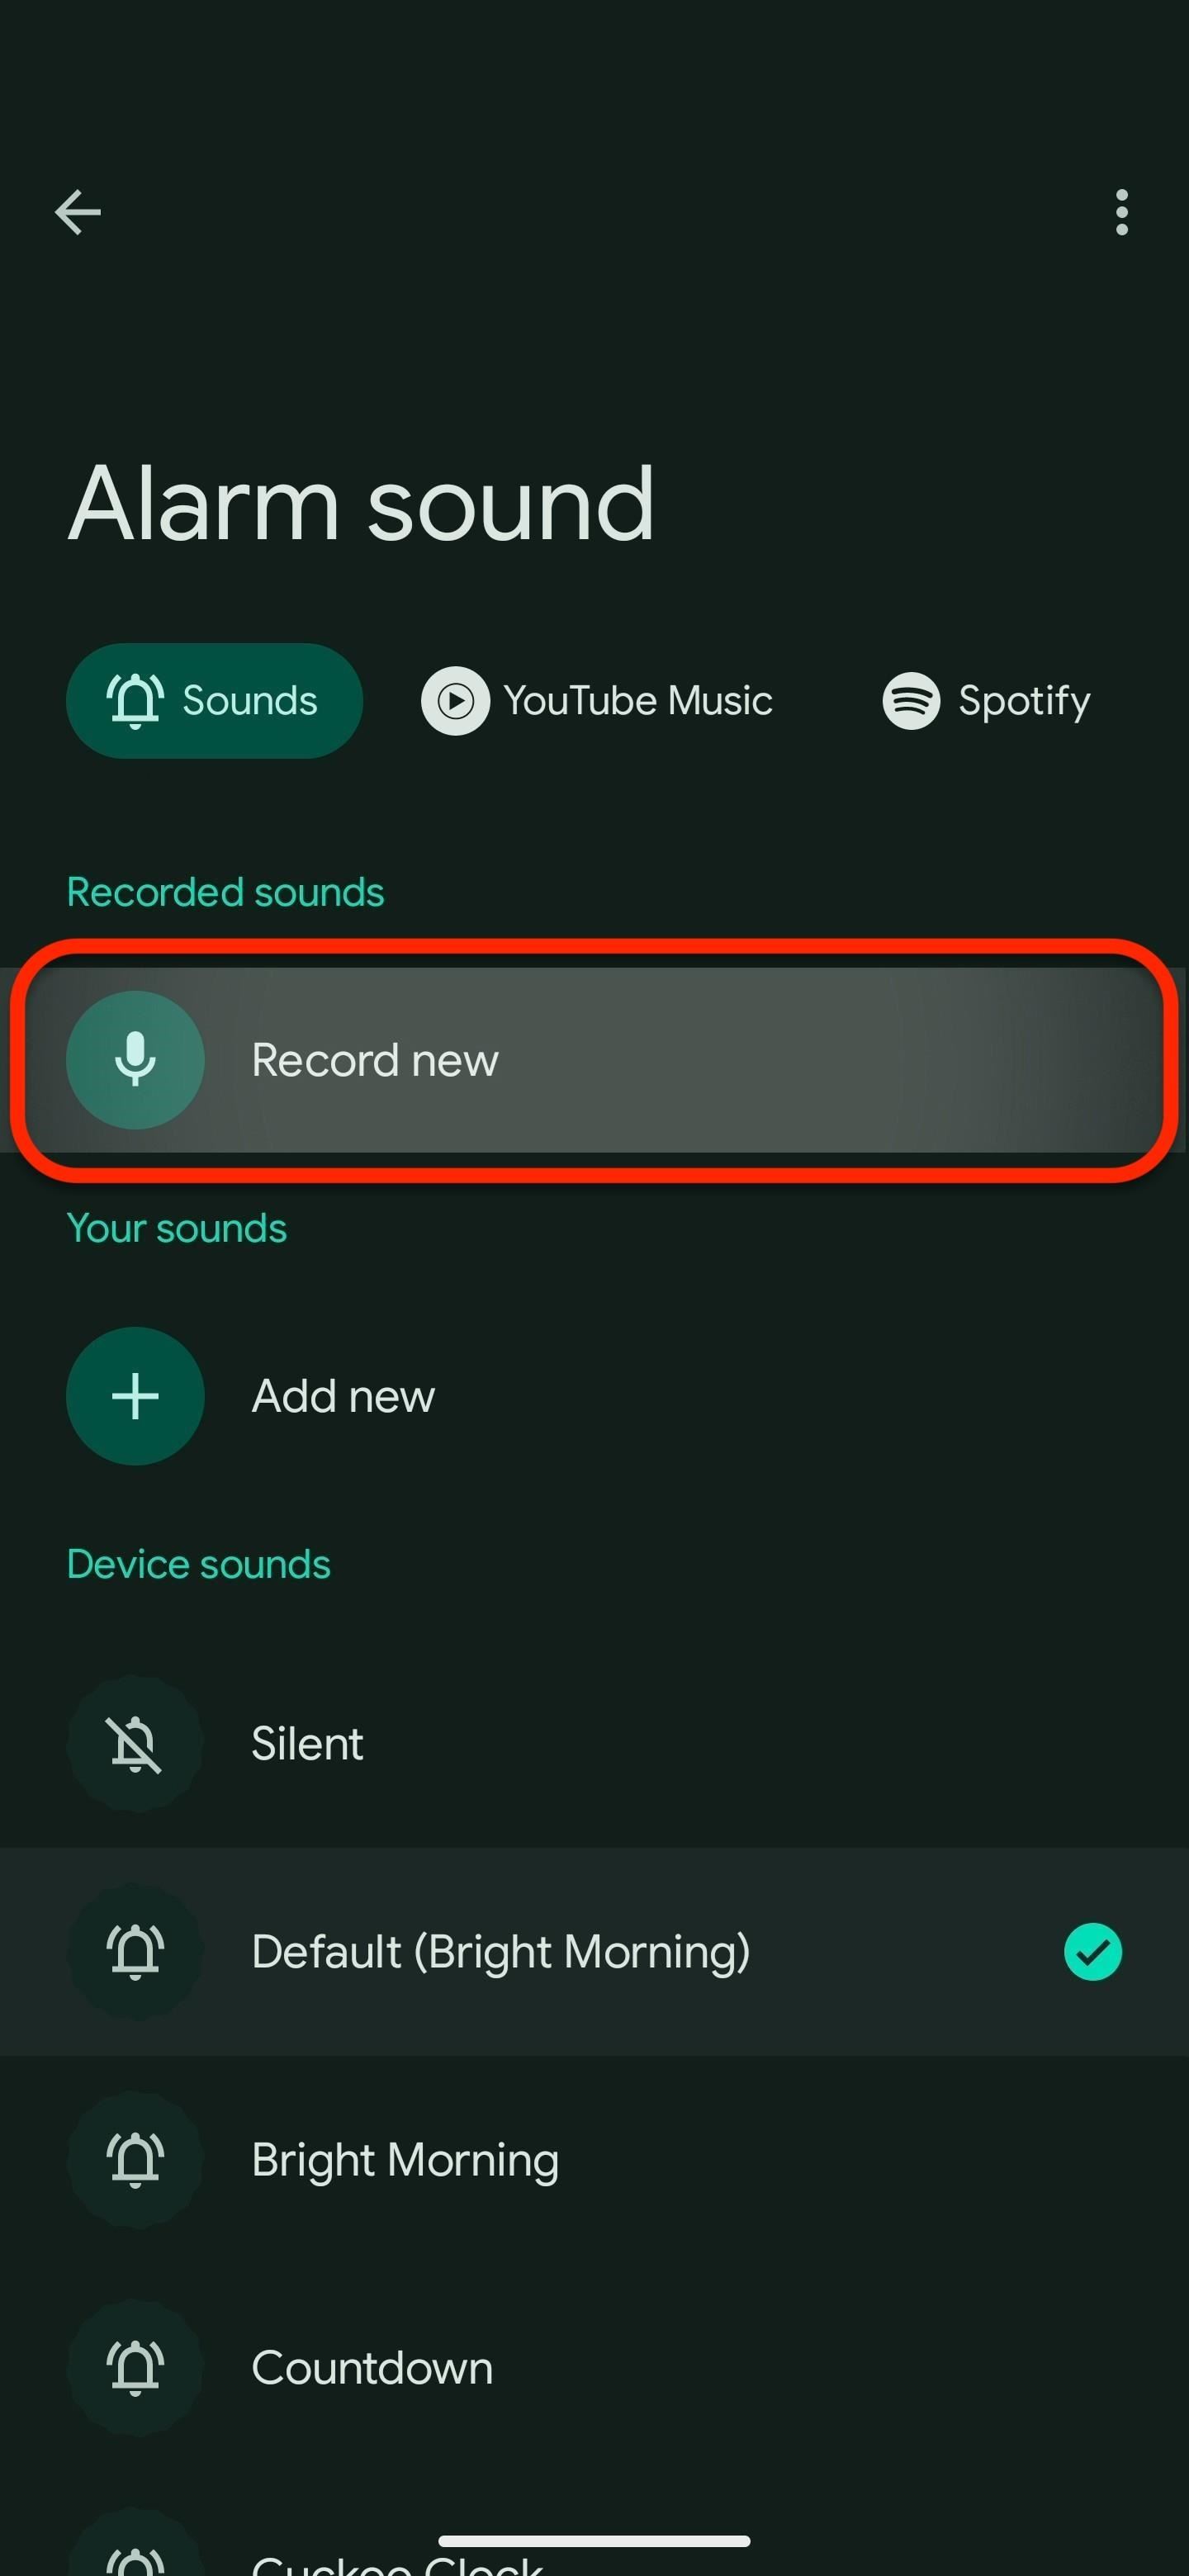 Record a Personal Alarm Sound or Message to Wake Up Hearing Your Own Voice